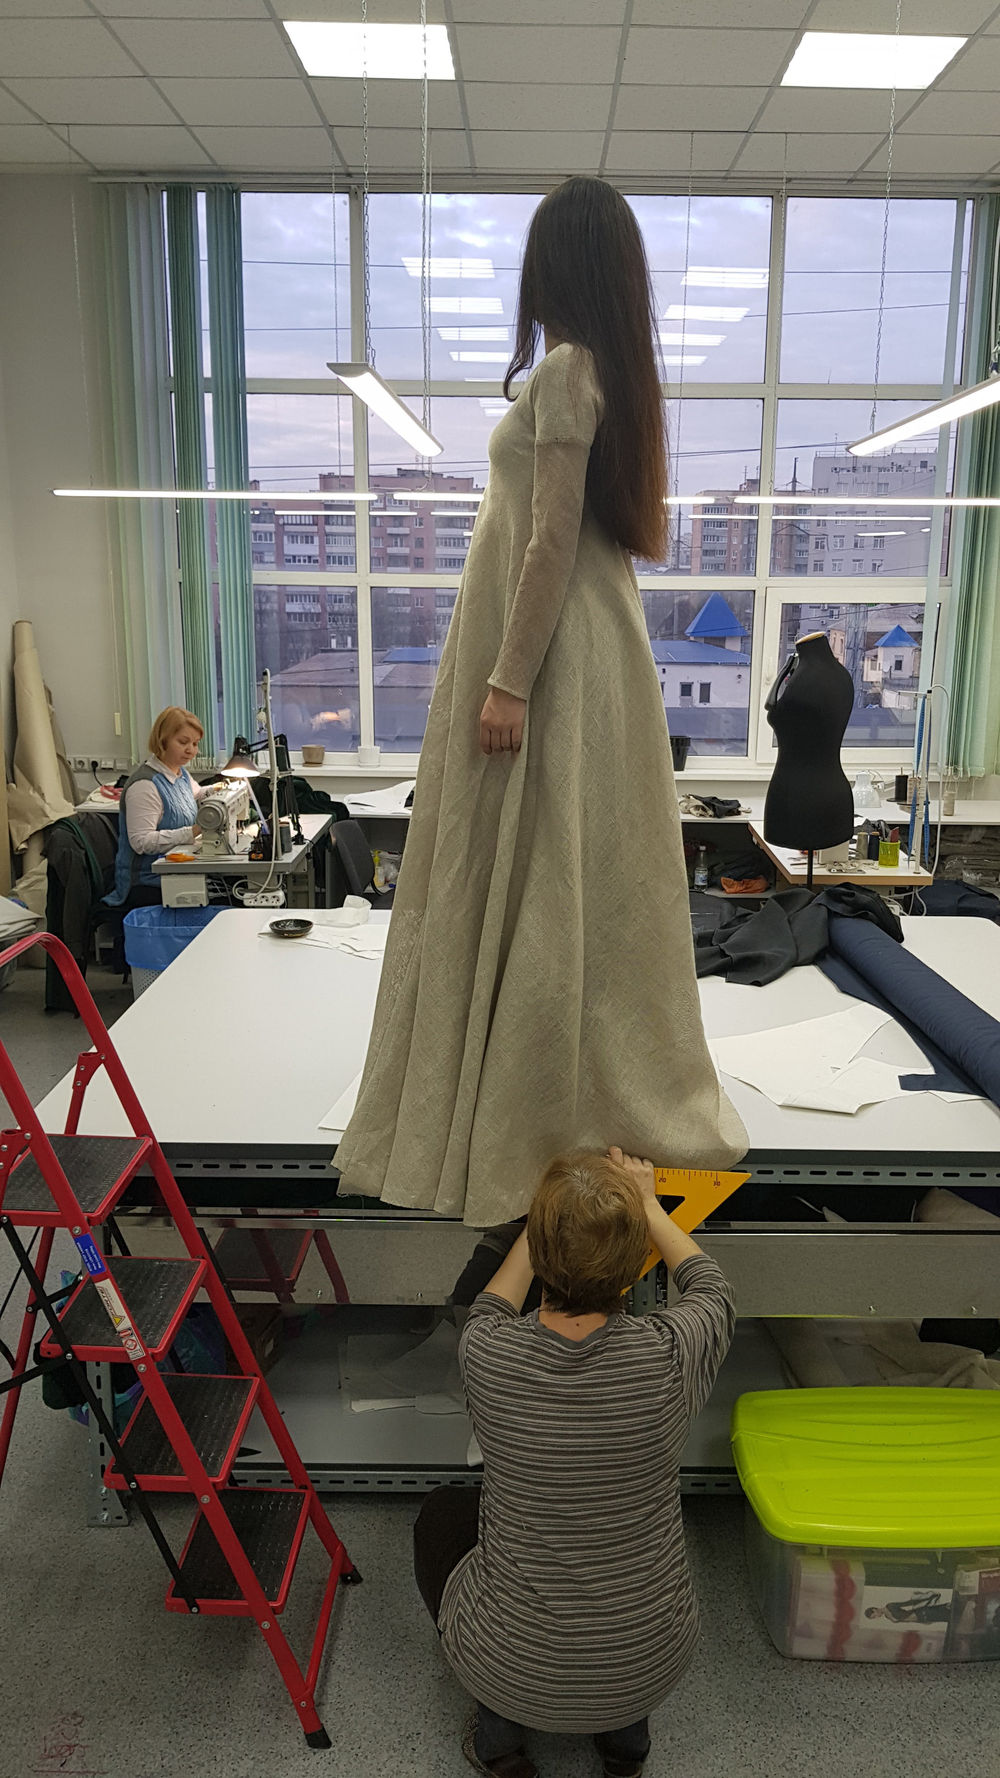 The creation of new sackcloth dress at ArmStreet